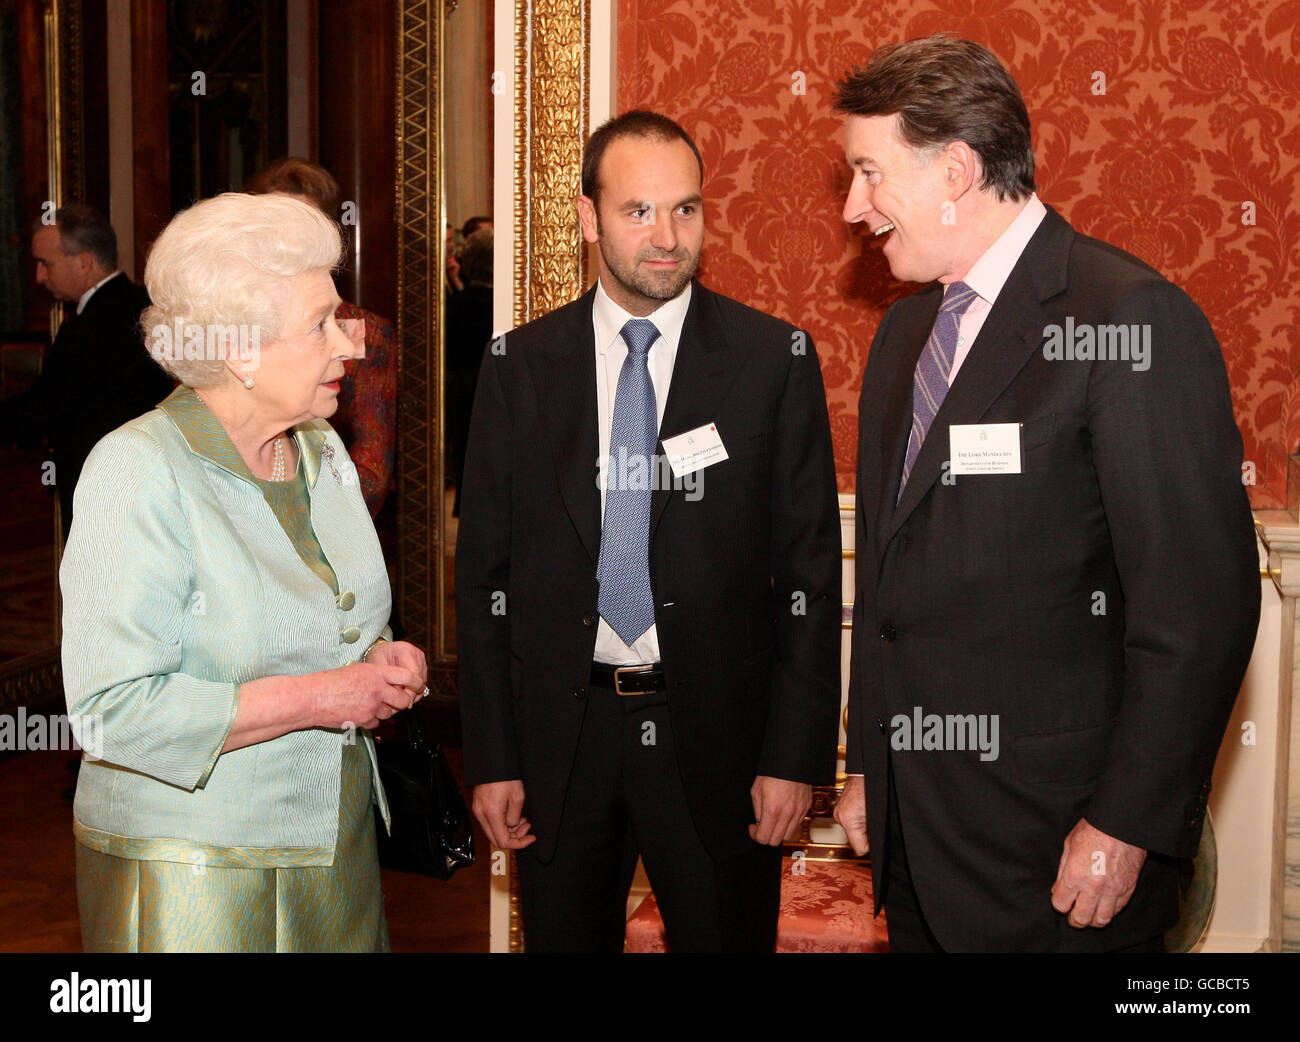 Queen Elizabeth II speaks to Mark Shuttleworth, the first African in space (centre) and Business Secretary Lord Mandelson (right) at a reception at Buckingham Palace, London, held in advance of next month's State Visit of the President of South Africa. Stock Photo